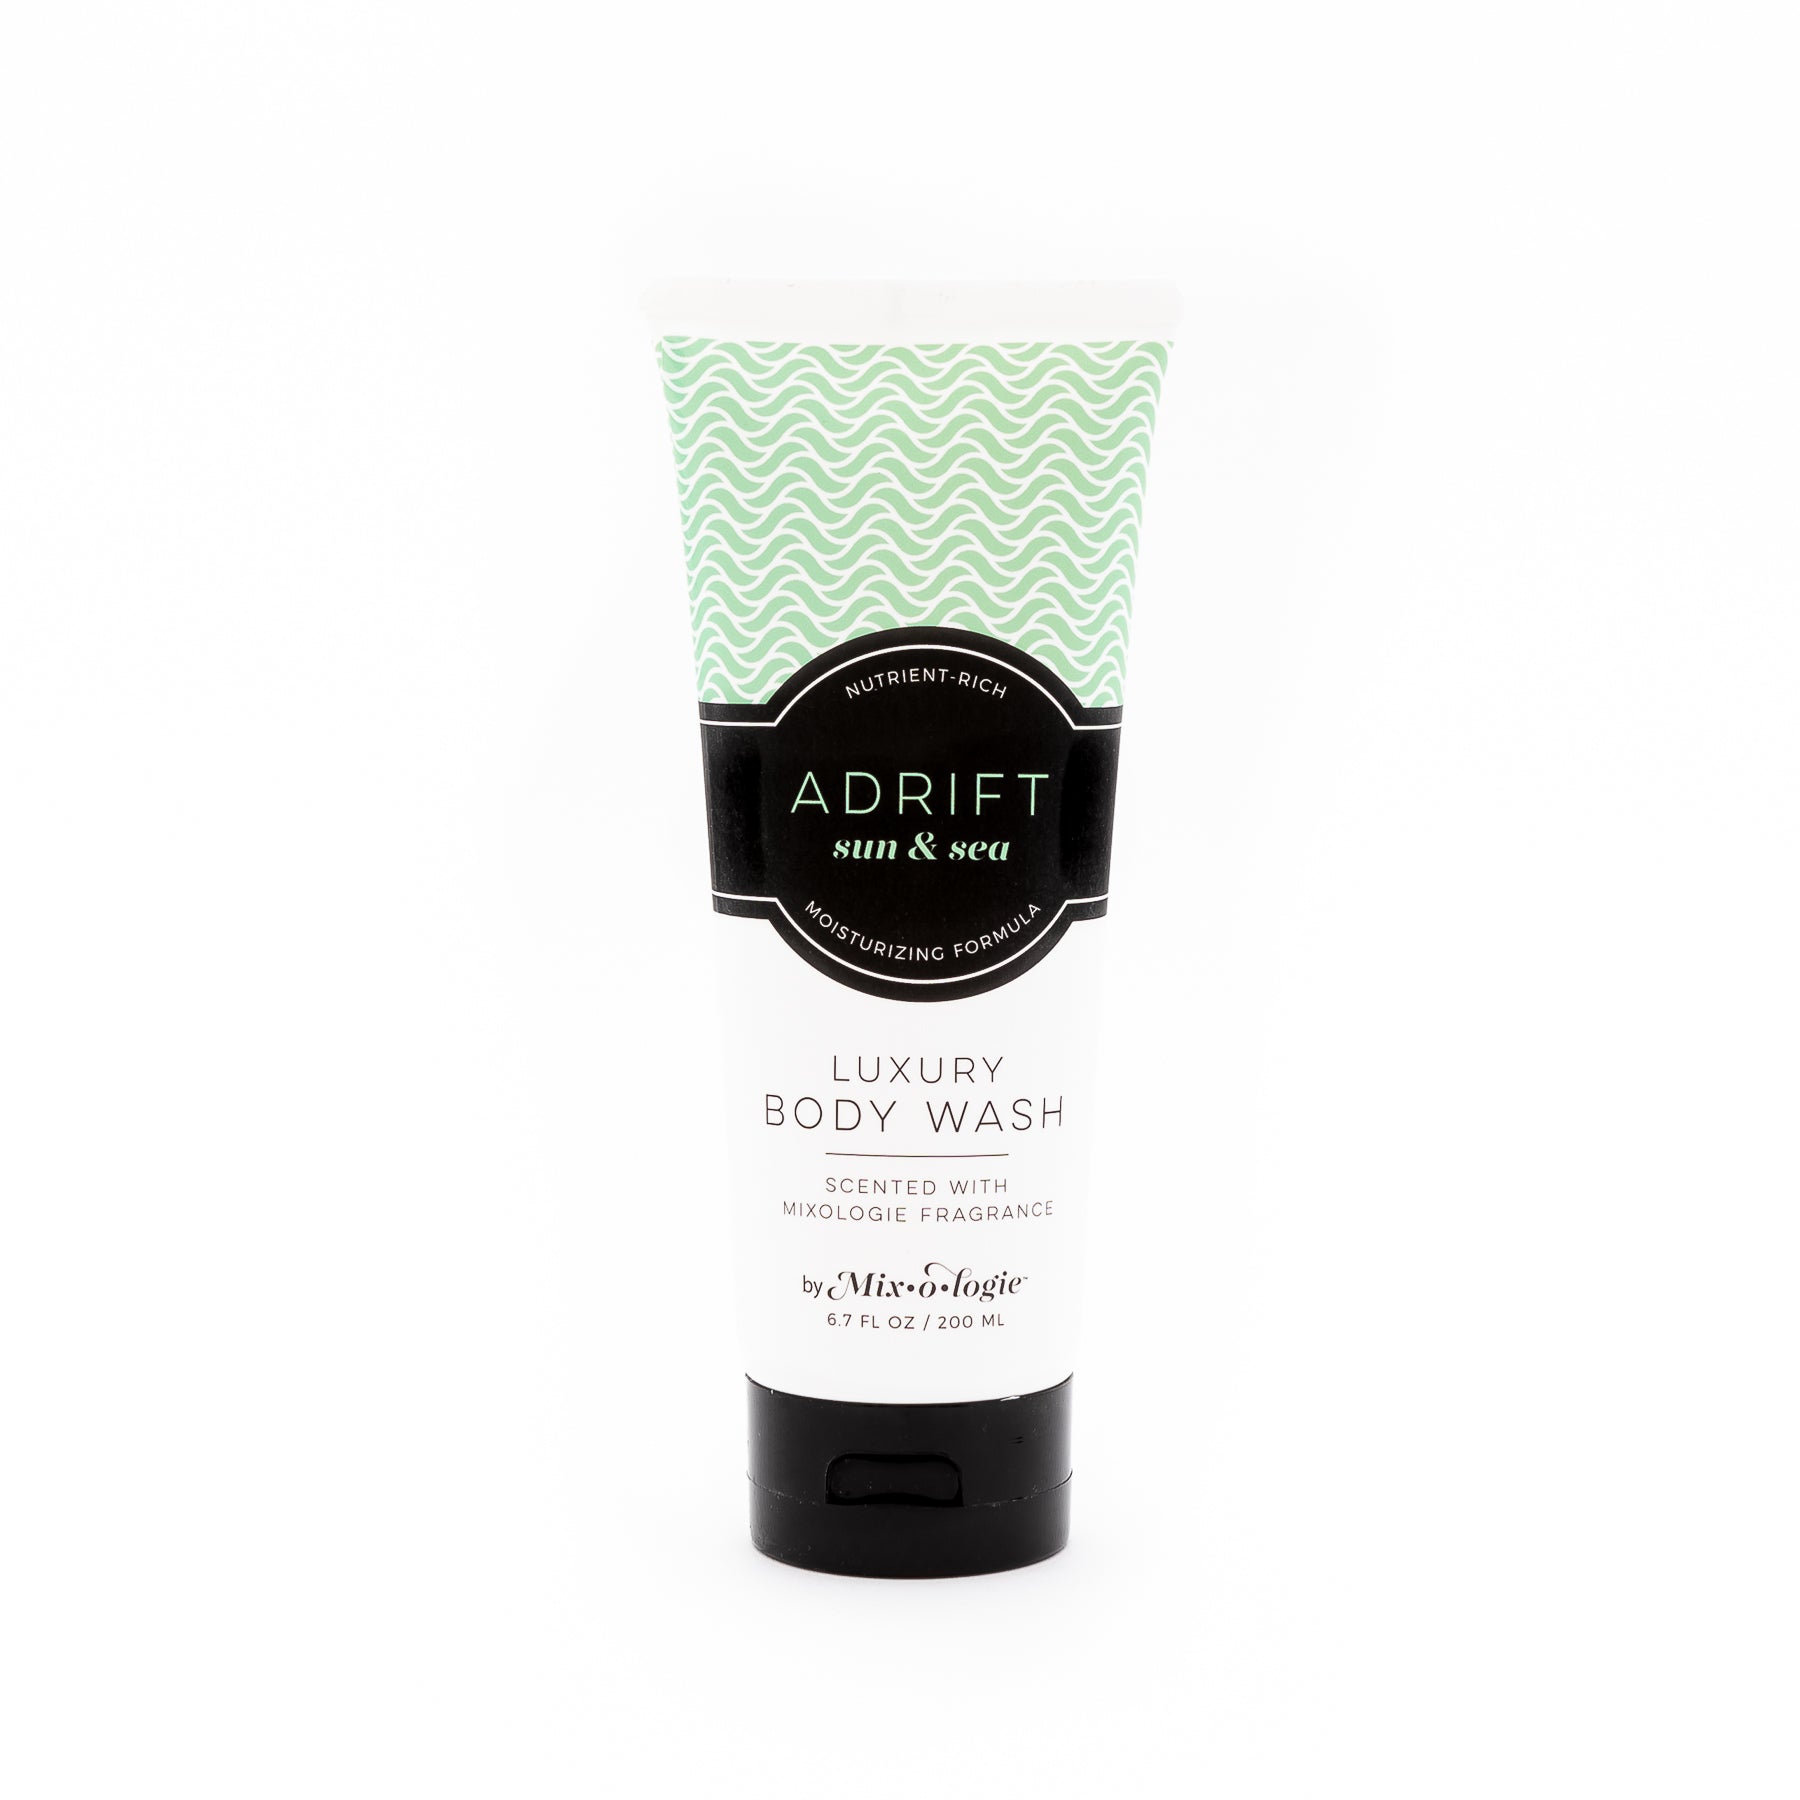 Luxury Body Wash in Mixologie’s Adrift (Sun & Sea) in light green color sample package with black label. Contains 6.7 fl oz or 200 mL pictured on a white background. 